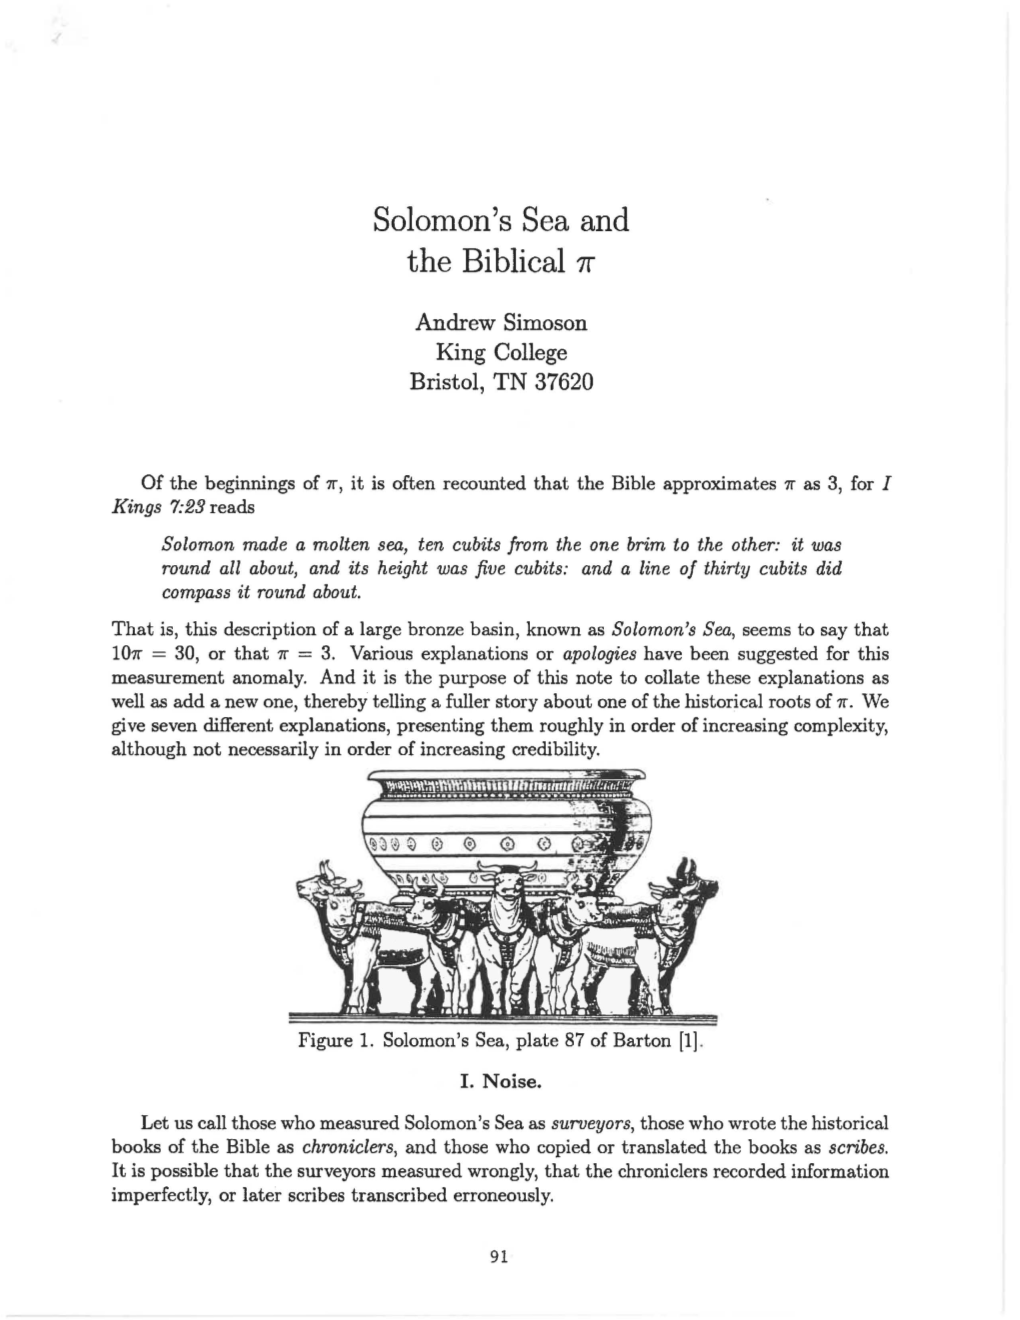 Solon1on's Sea and the Biblical 1R